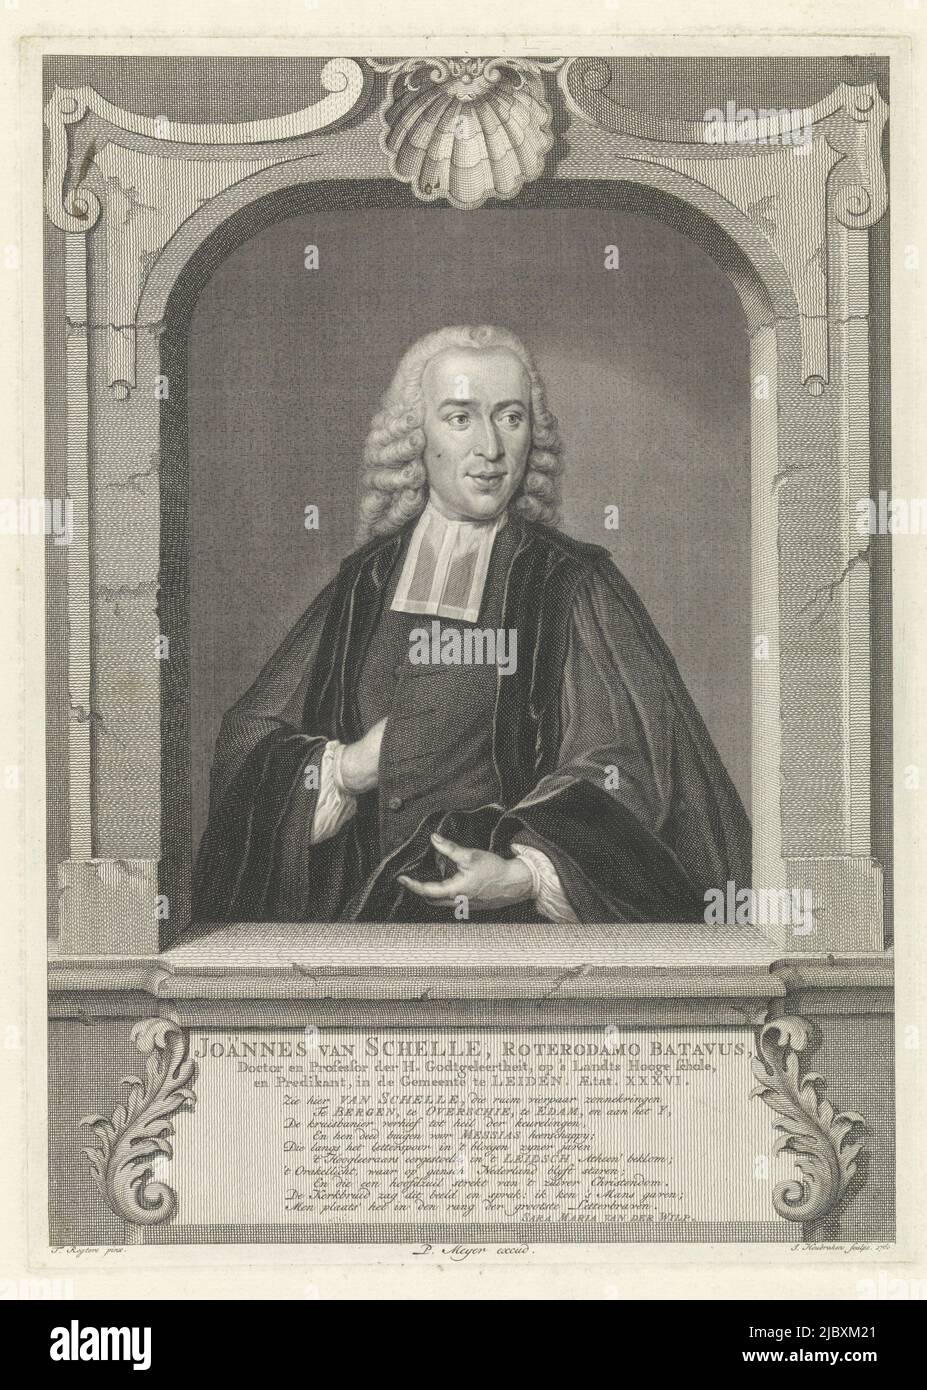 Portrait in the half-figure of Johannes van Schelle at age 36 in an architectural window. Beneath the window his name and details in three lines in Dutch and below that a ten line verse in Dutch., Portrait of Johannes van Schelle Joännes van Schelle , print maker: Jacob Houbraken, (mentioned on object), after: Tibout Regters, (mentioned on object), Sara Maria van der Wilp, (mentioned on object), Amsterdam, 1760, paper, engraving, etching, h 344 mm × w 248 mm Stock Photo